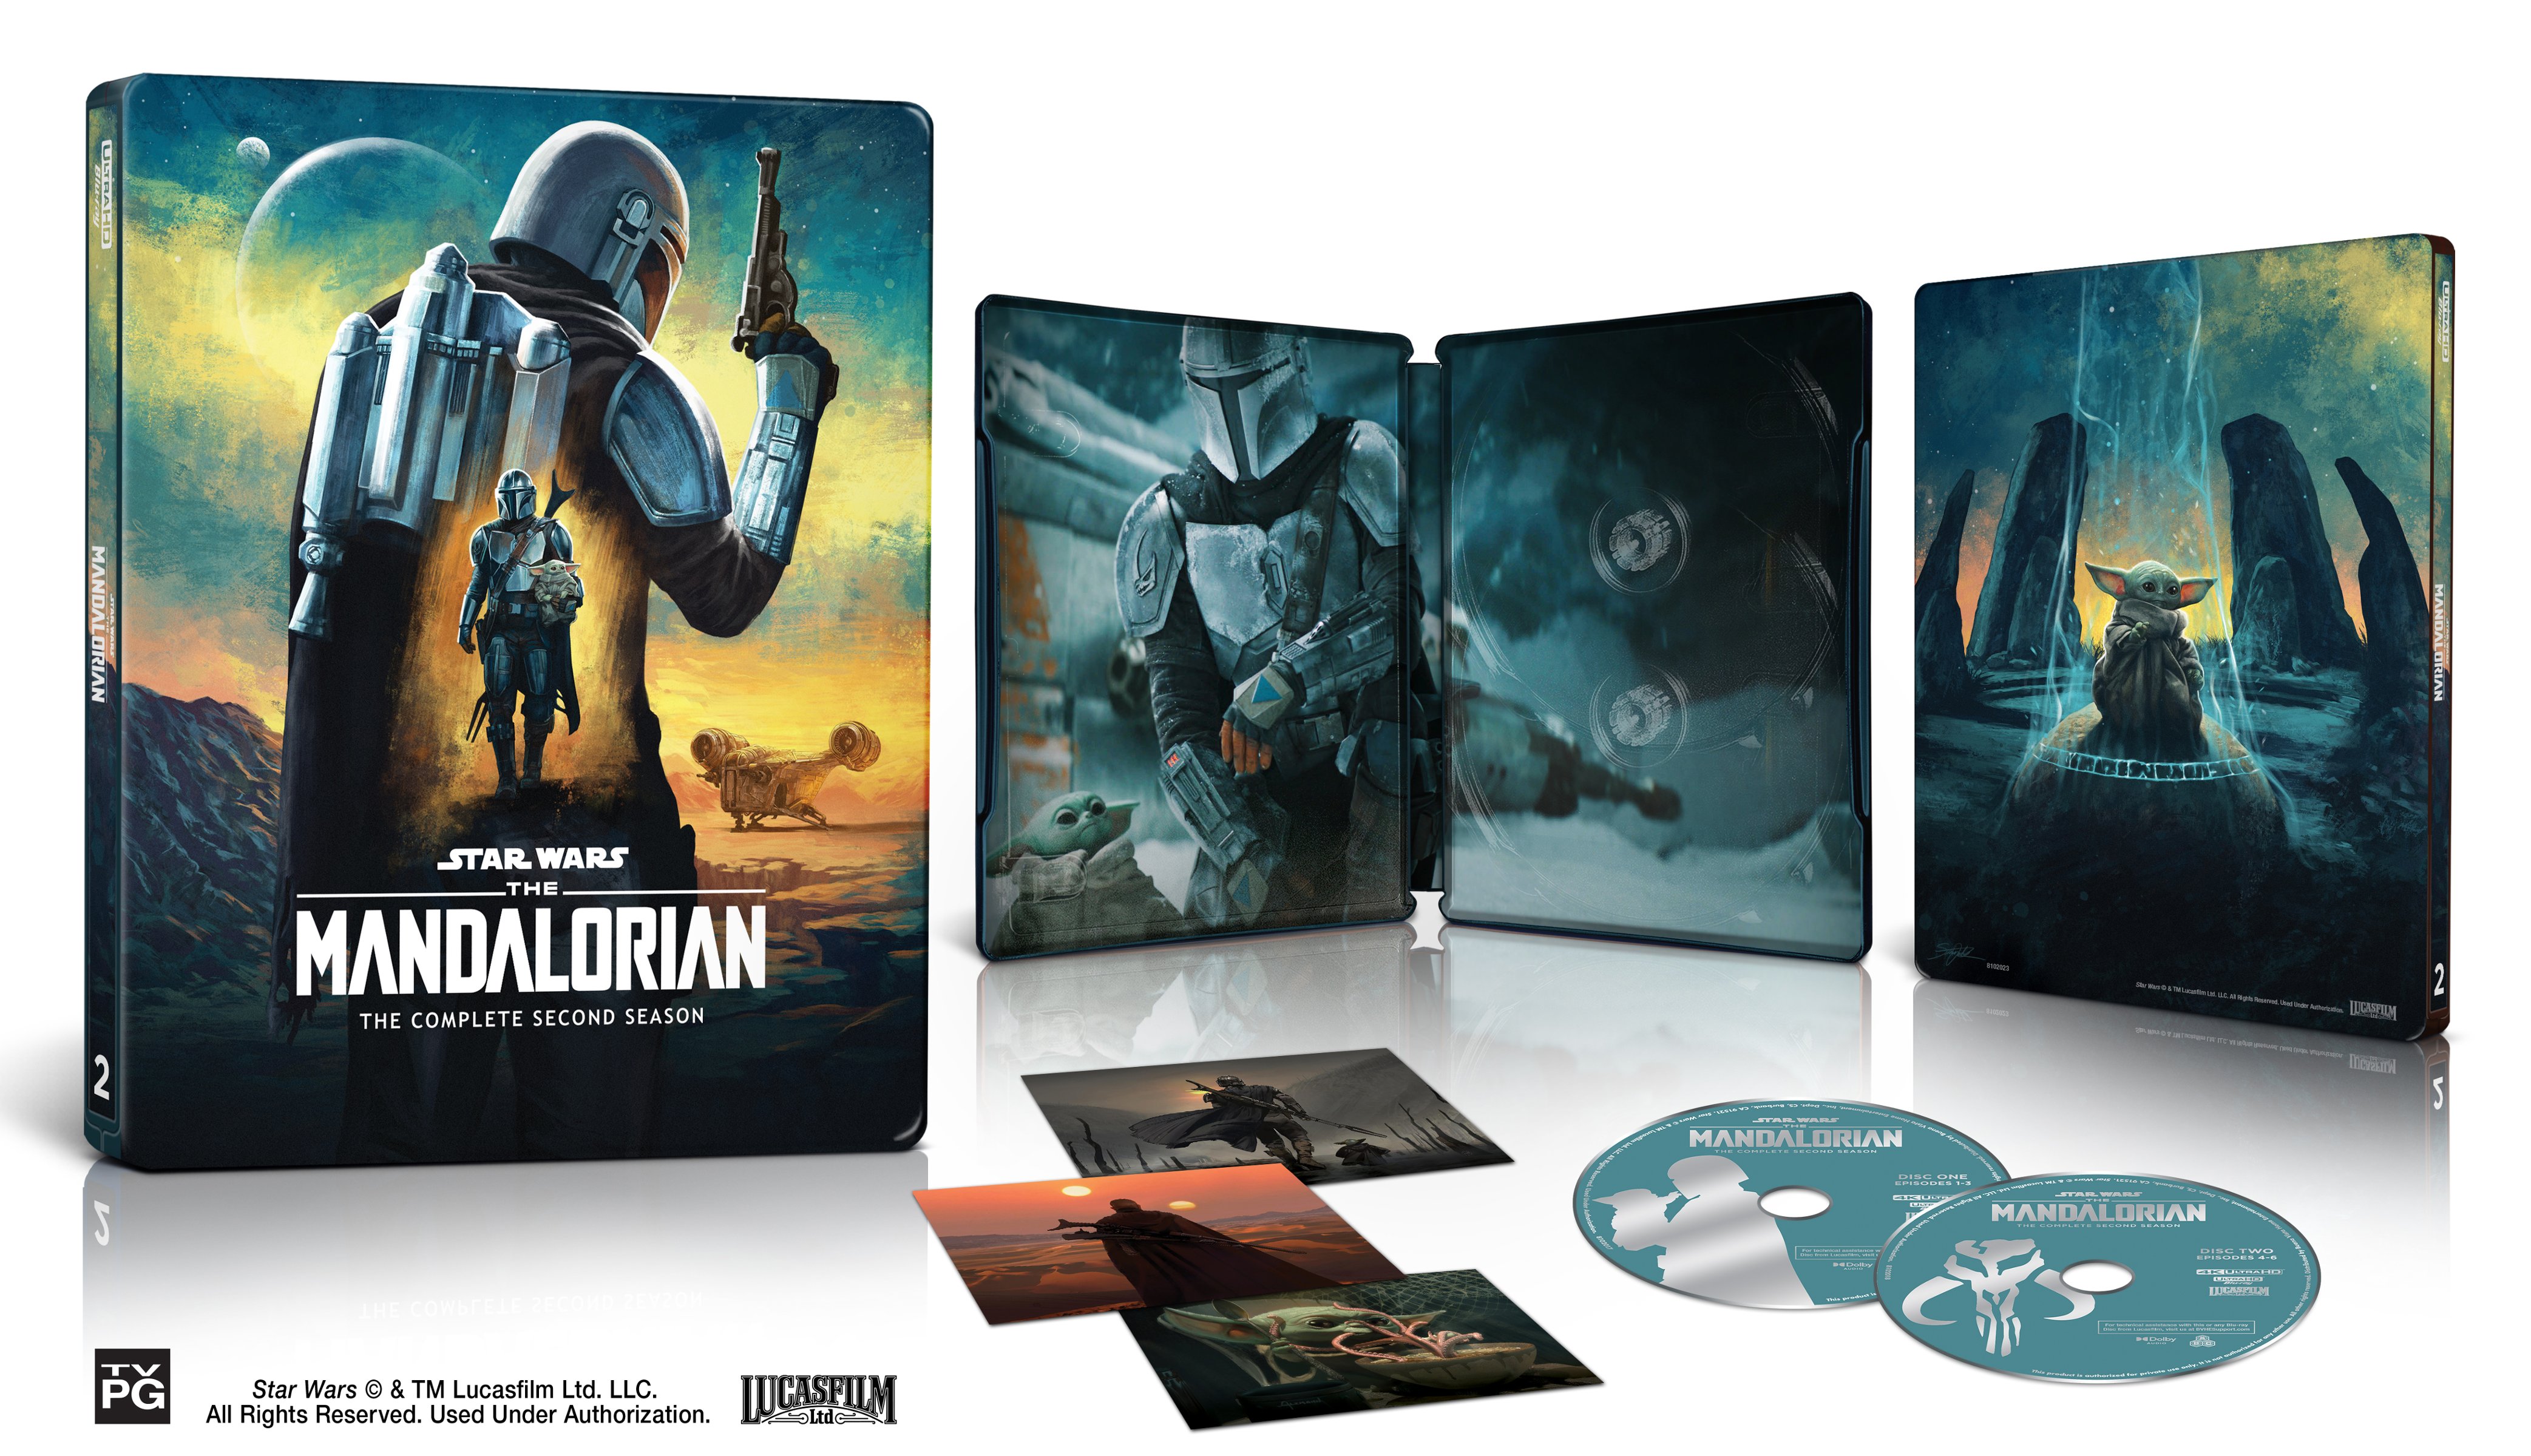 The Mandalorian: The Complete First Season Blu-ray SteelBook Unboxing 